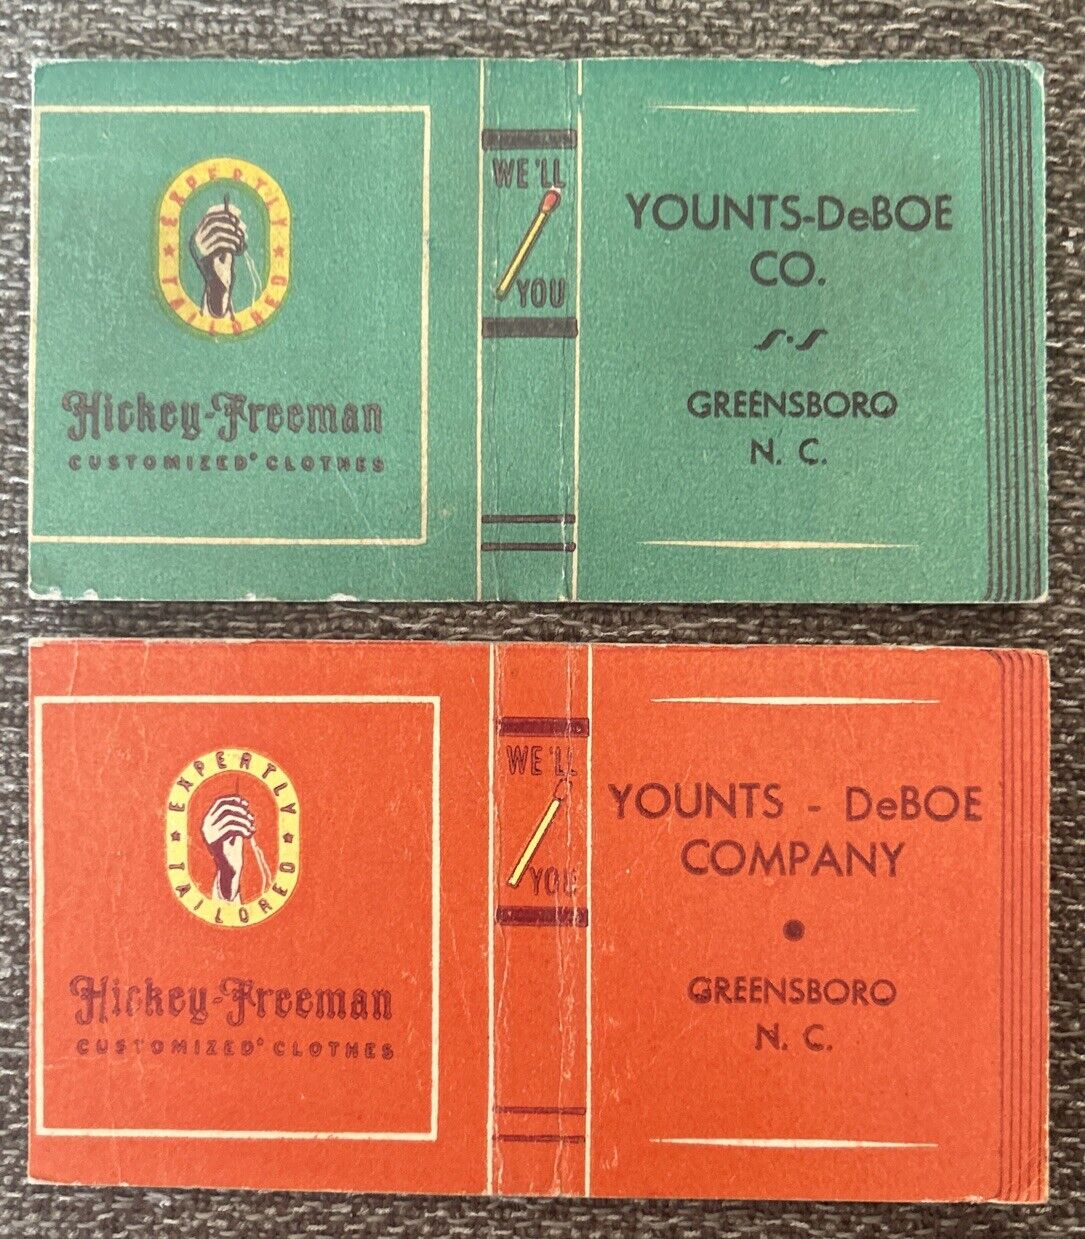 VTG HICKEY-FREEMAN CLOTHES MATCHBOOK COVERS, YOUNTS-DeBOE CO. GREENSBORO, N.C.